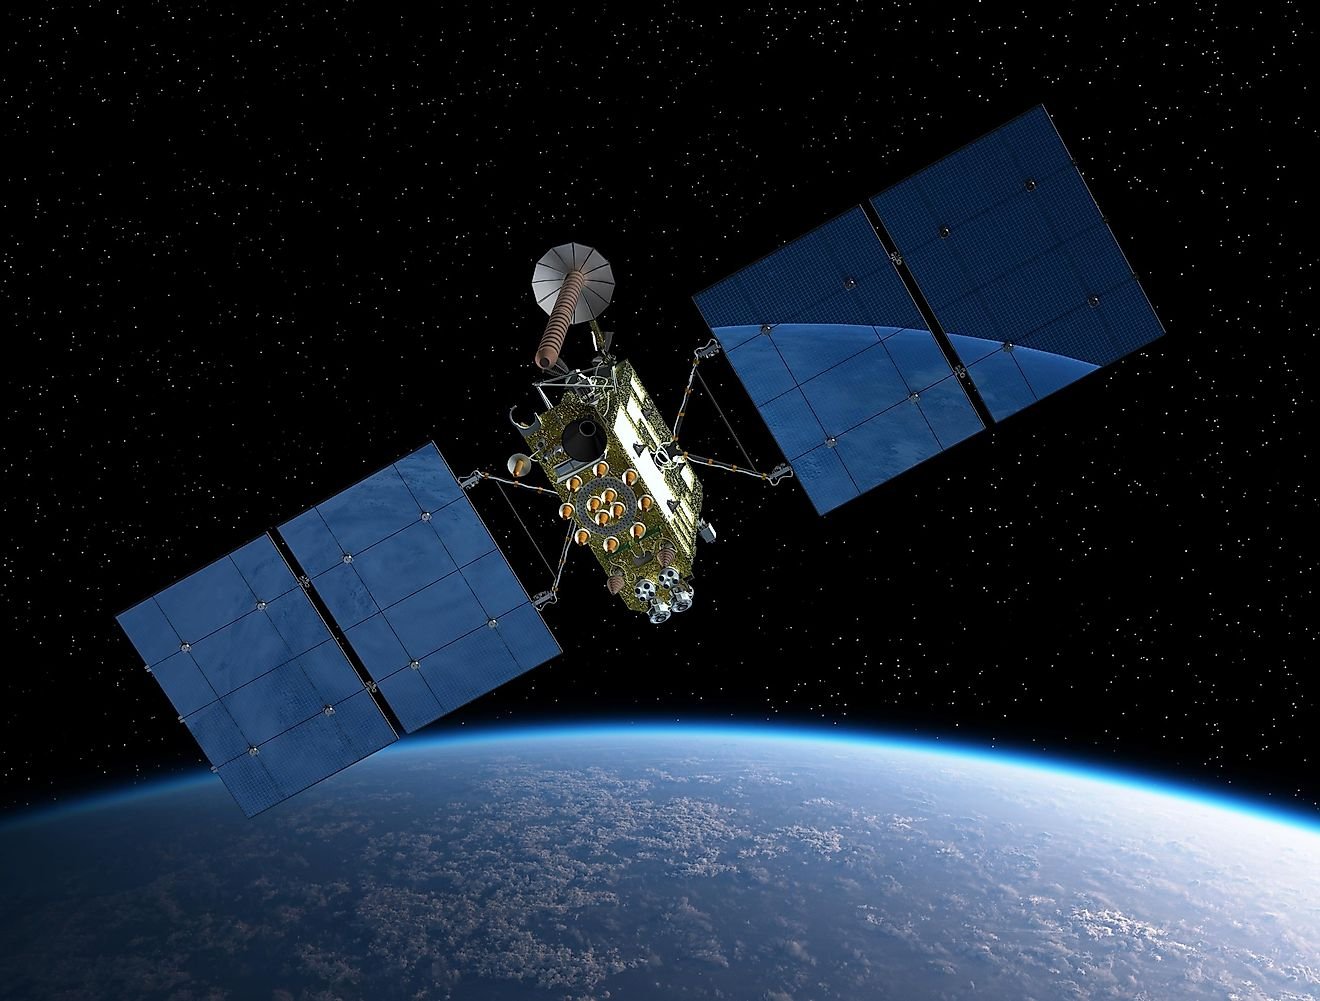 Where Do Artificial Satellites Orbit The Earth: In The Atmosphere Or Outer Space?